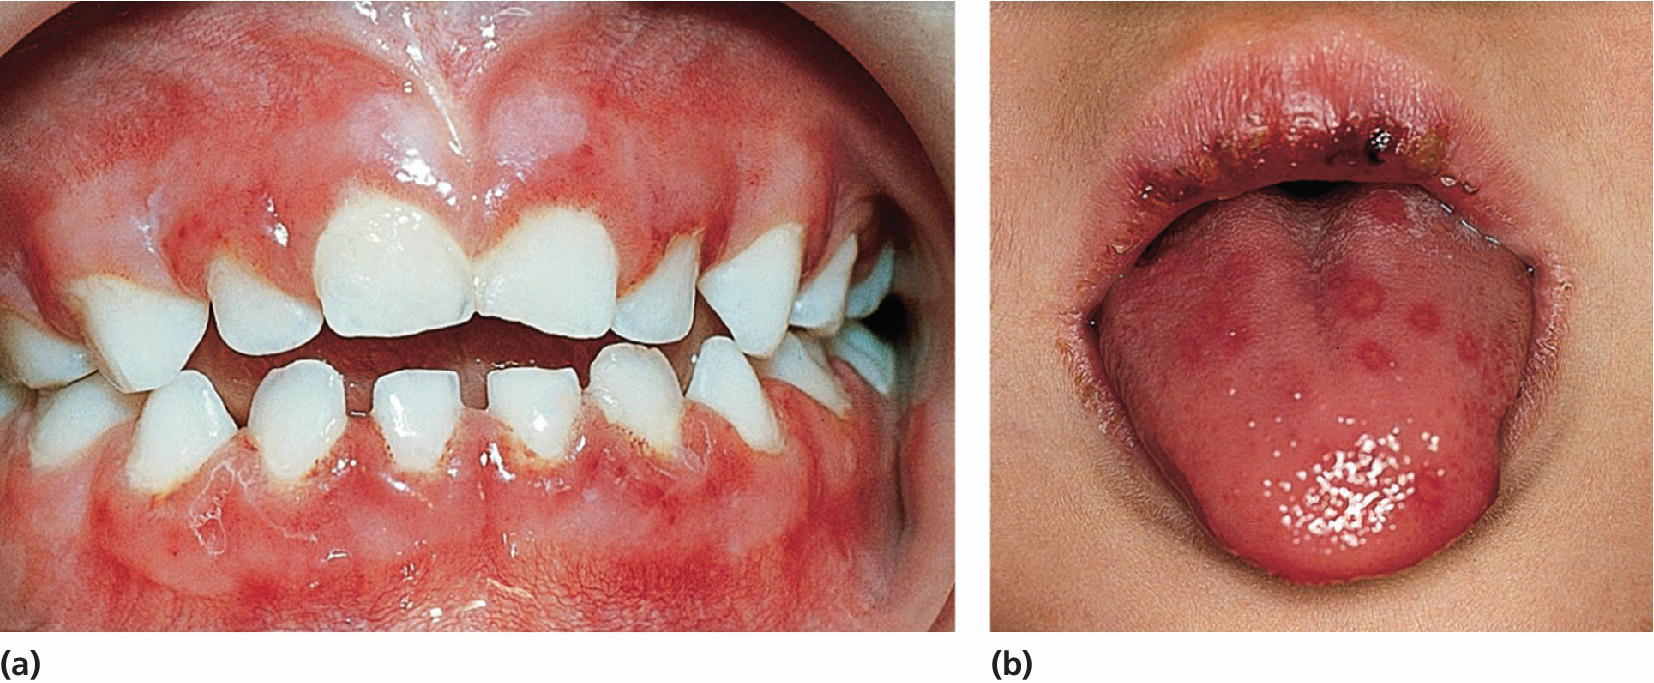 2 Photos displaying herpes simplex lesions spread over the alveolar mucosa (a) and tongue (b).